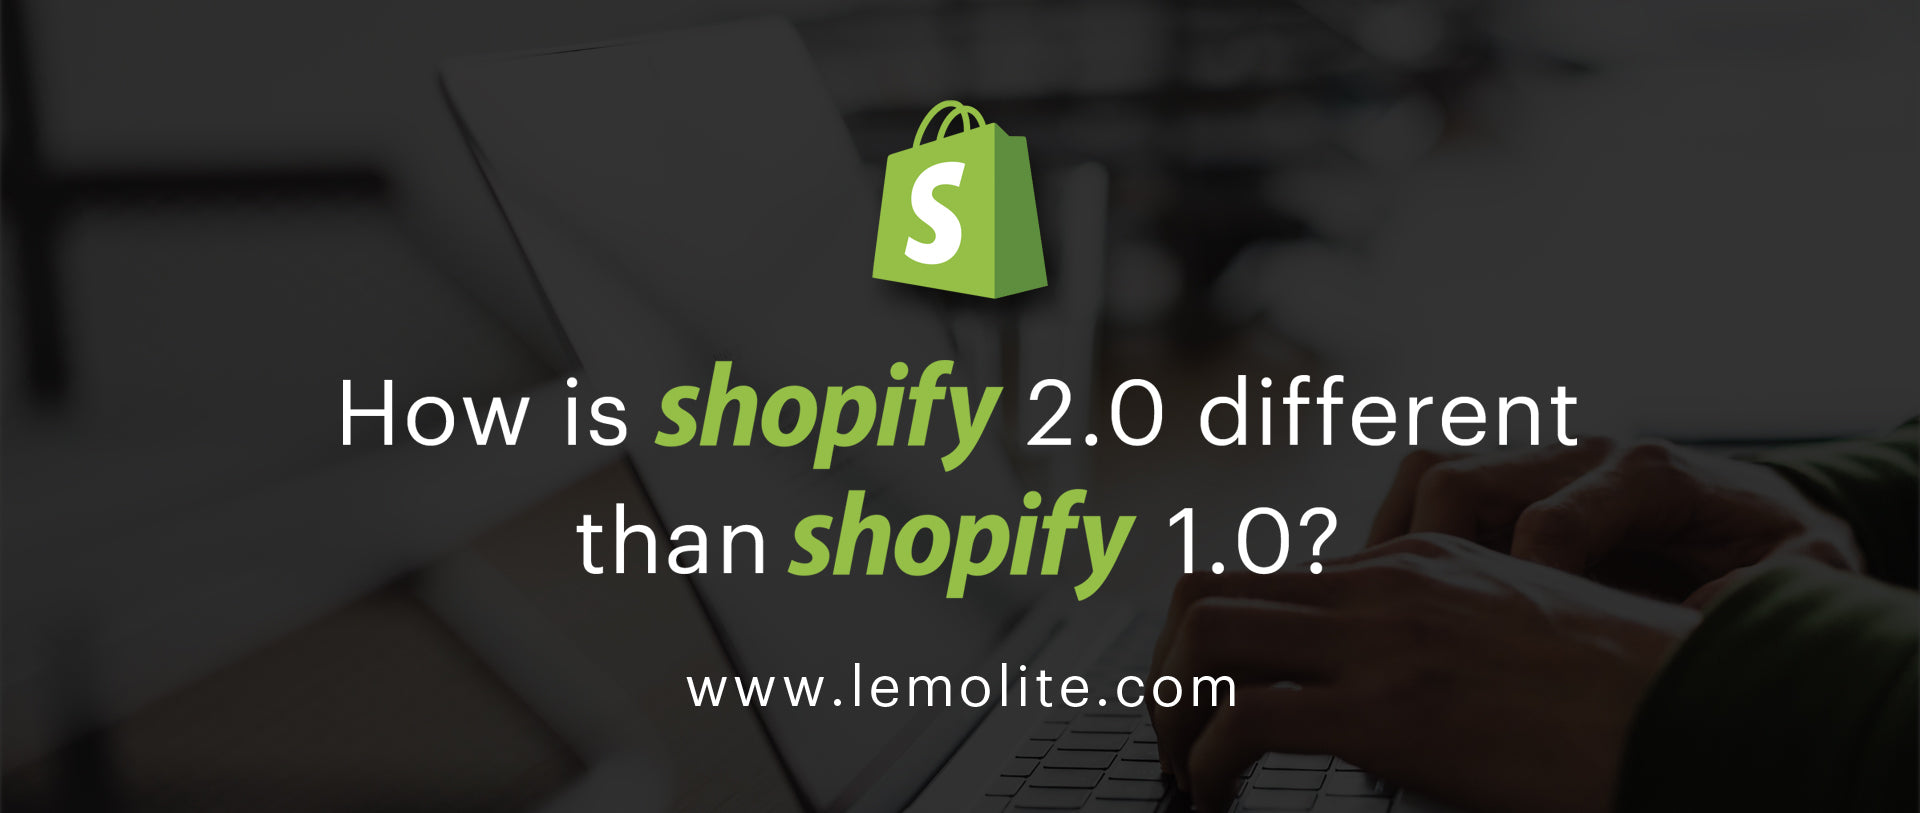 How is Shopify 2.0 different than Shopify 1.0?